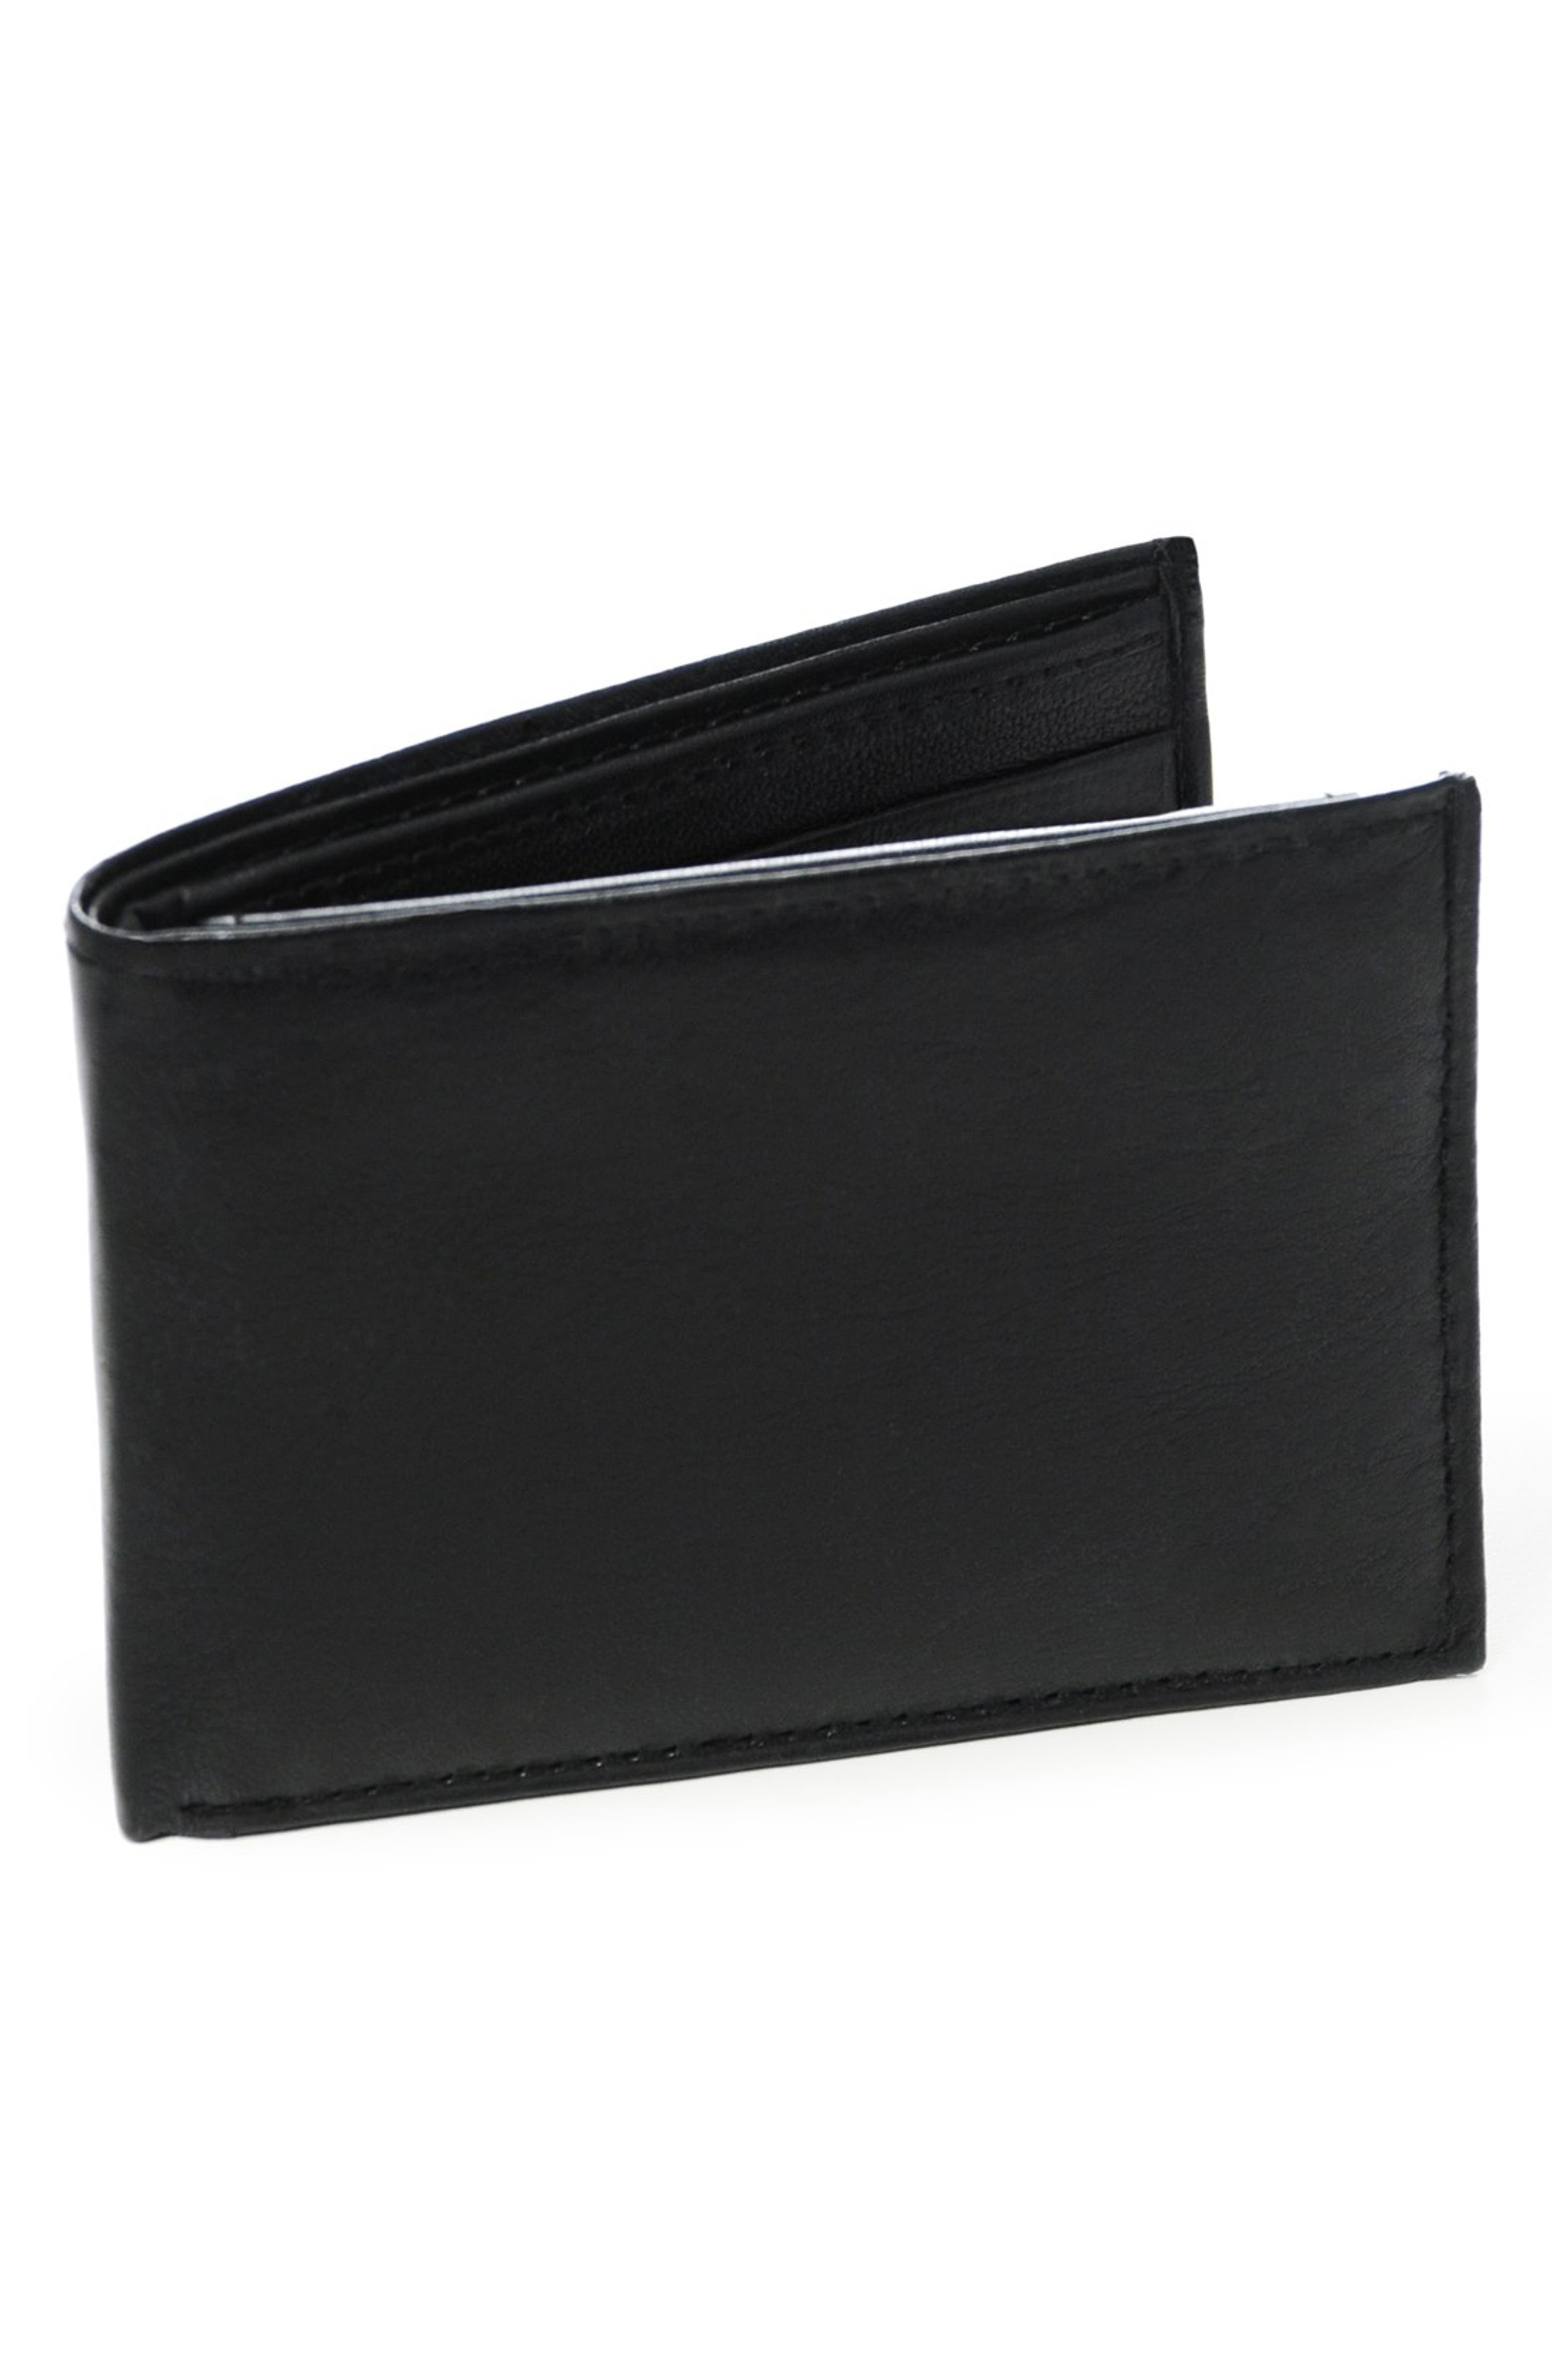 Cathy's Concepts 'Kensington' Personalized Bifold Wallet | Nordstrom